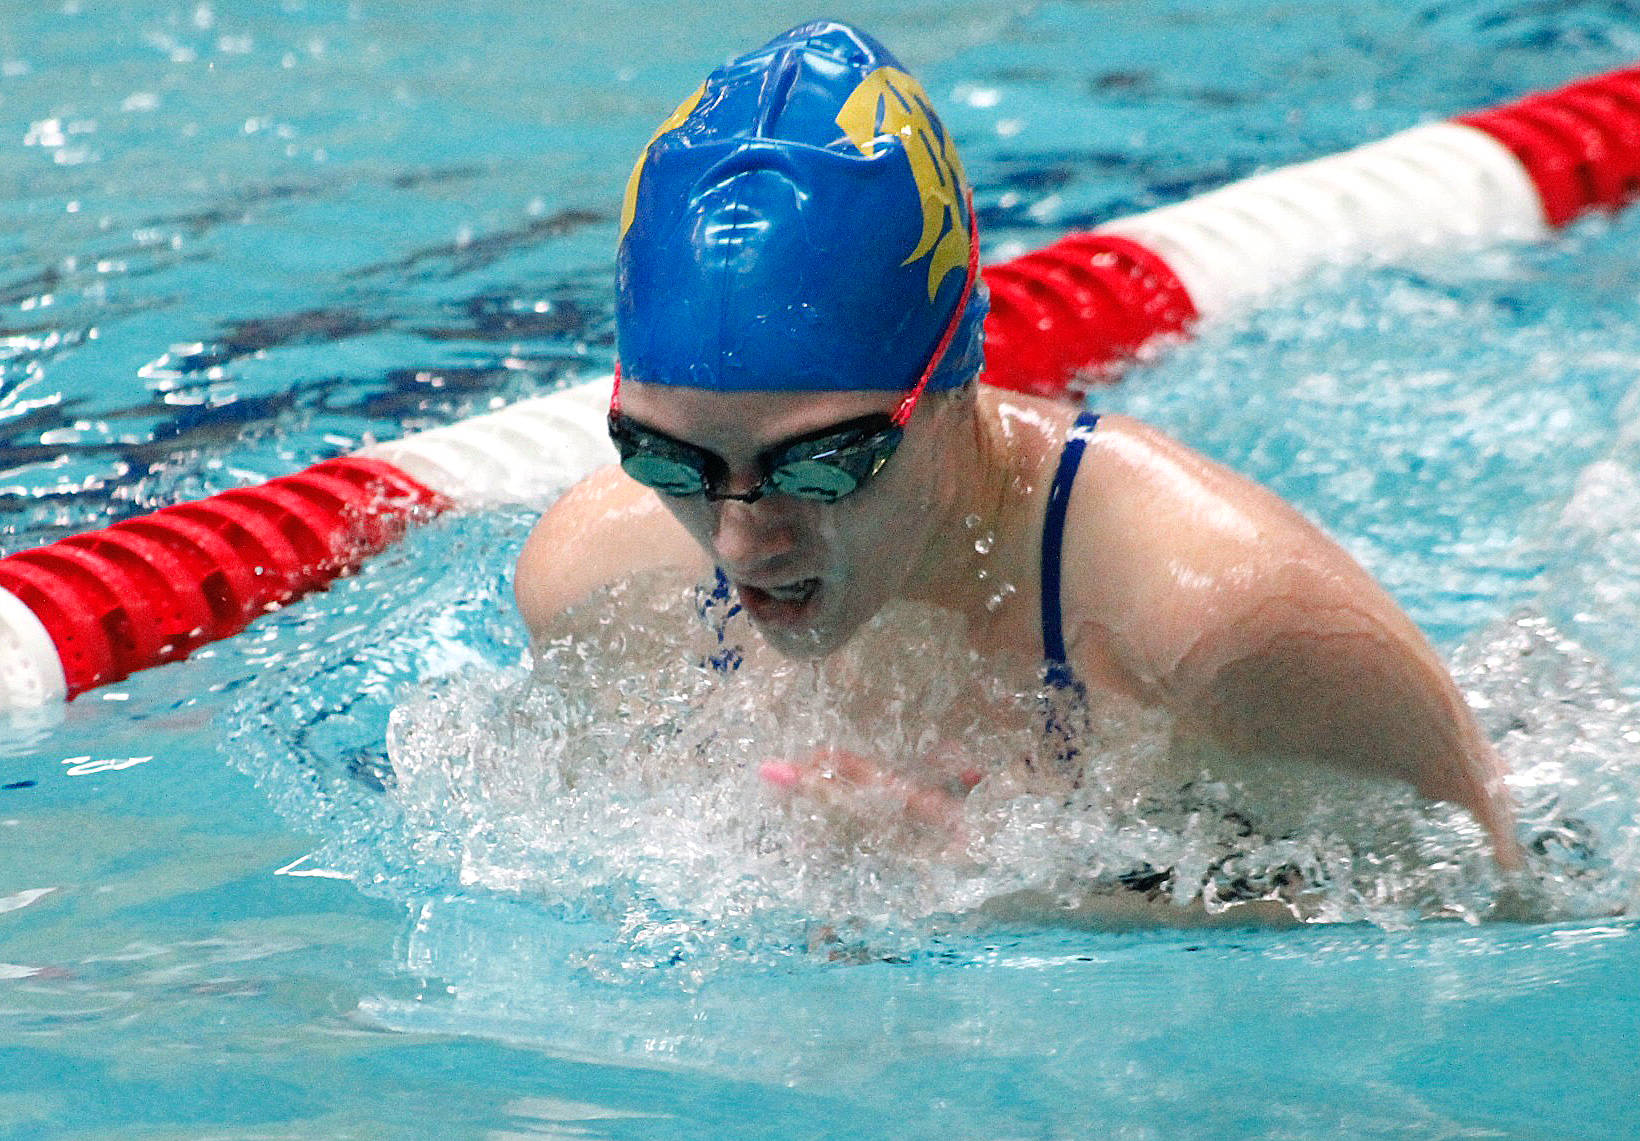 Bremerton’s Dani Bodlorick will participate in the 100-yard breaststroke and 200-yard IM at the 2A state meet this weekend. Mark Krulish/Kitsap News Group